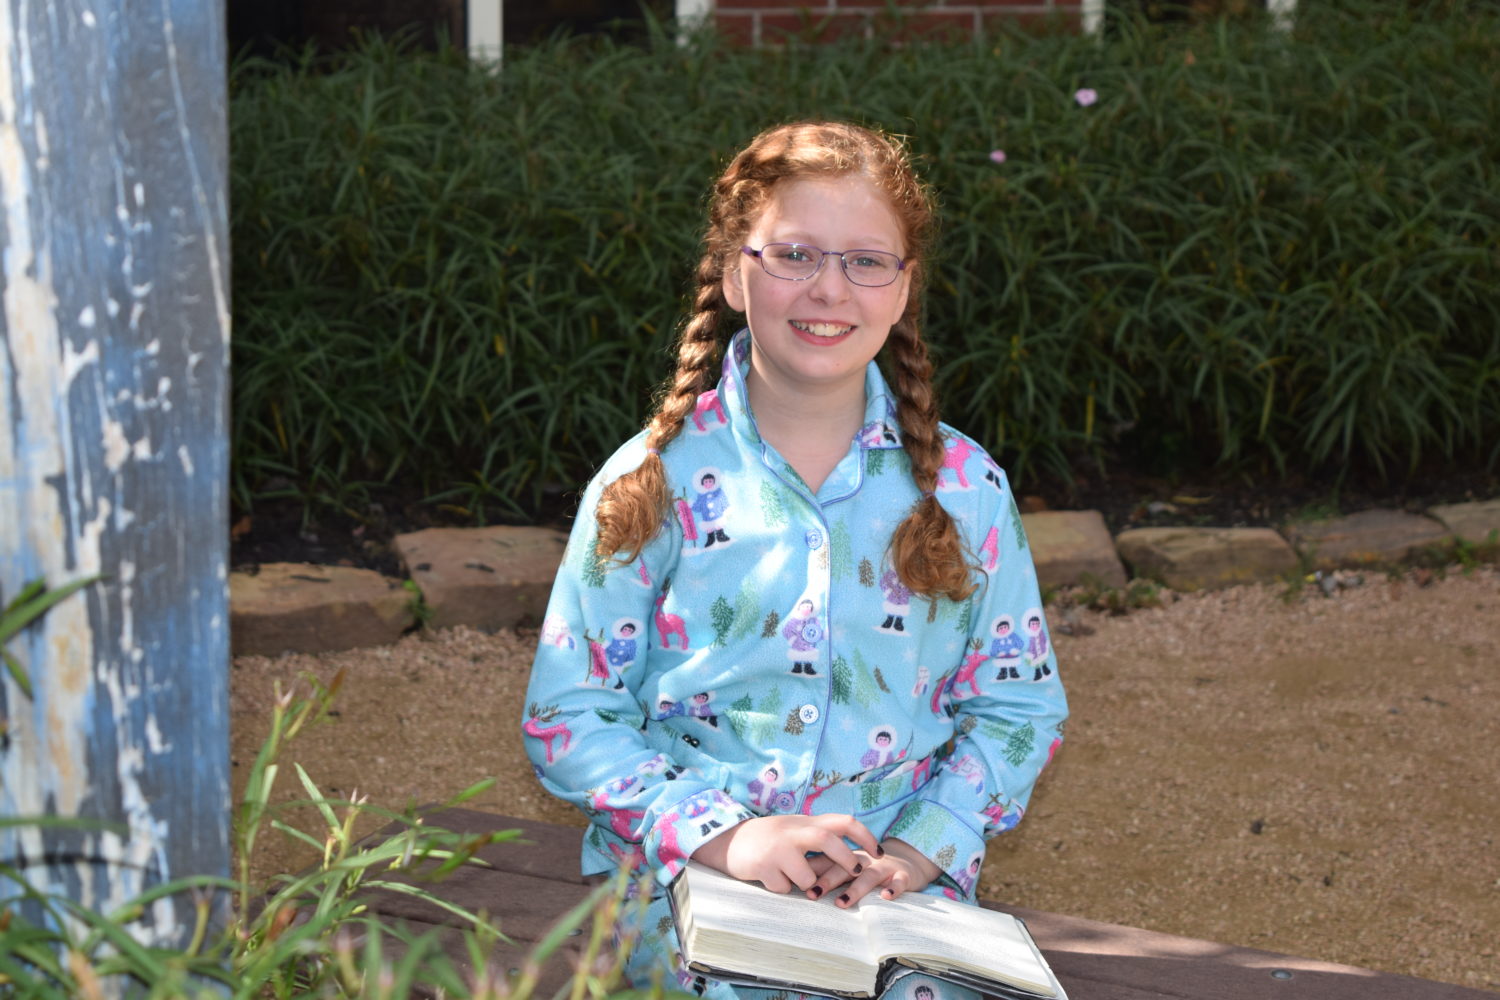 A Mitchell Intermediate student enjoyed reading enjoyed reading in the nice fall weather.